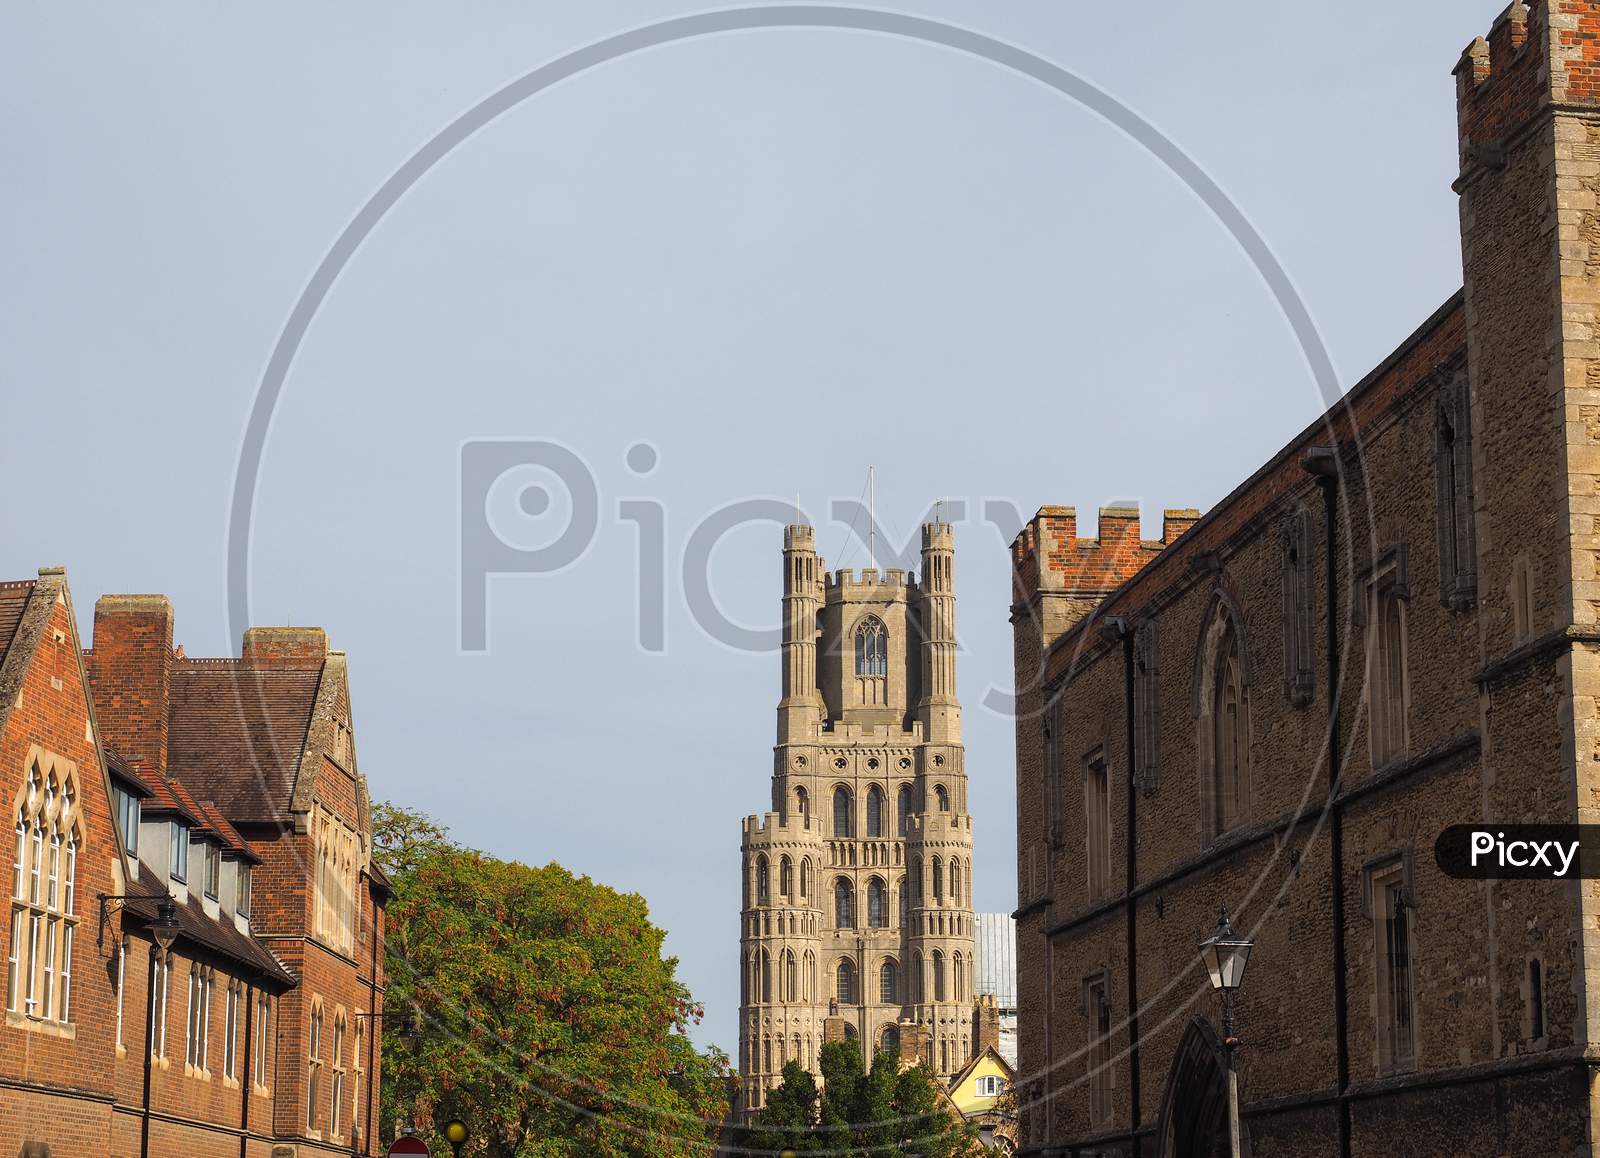 Ely Cathedral In Ely